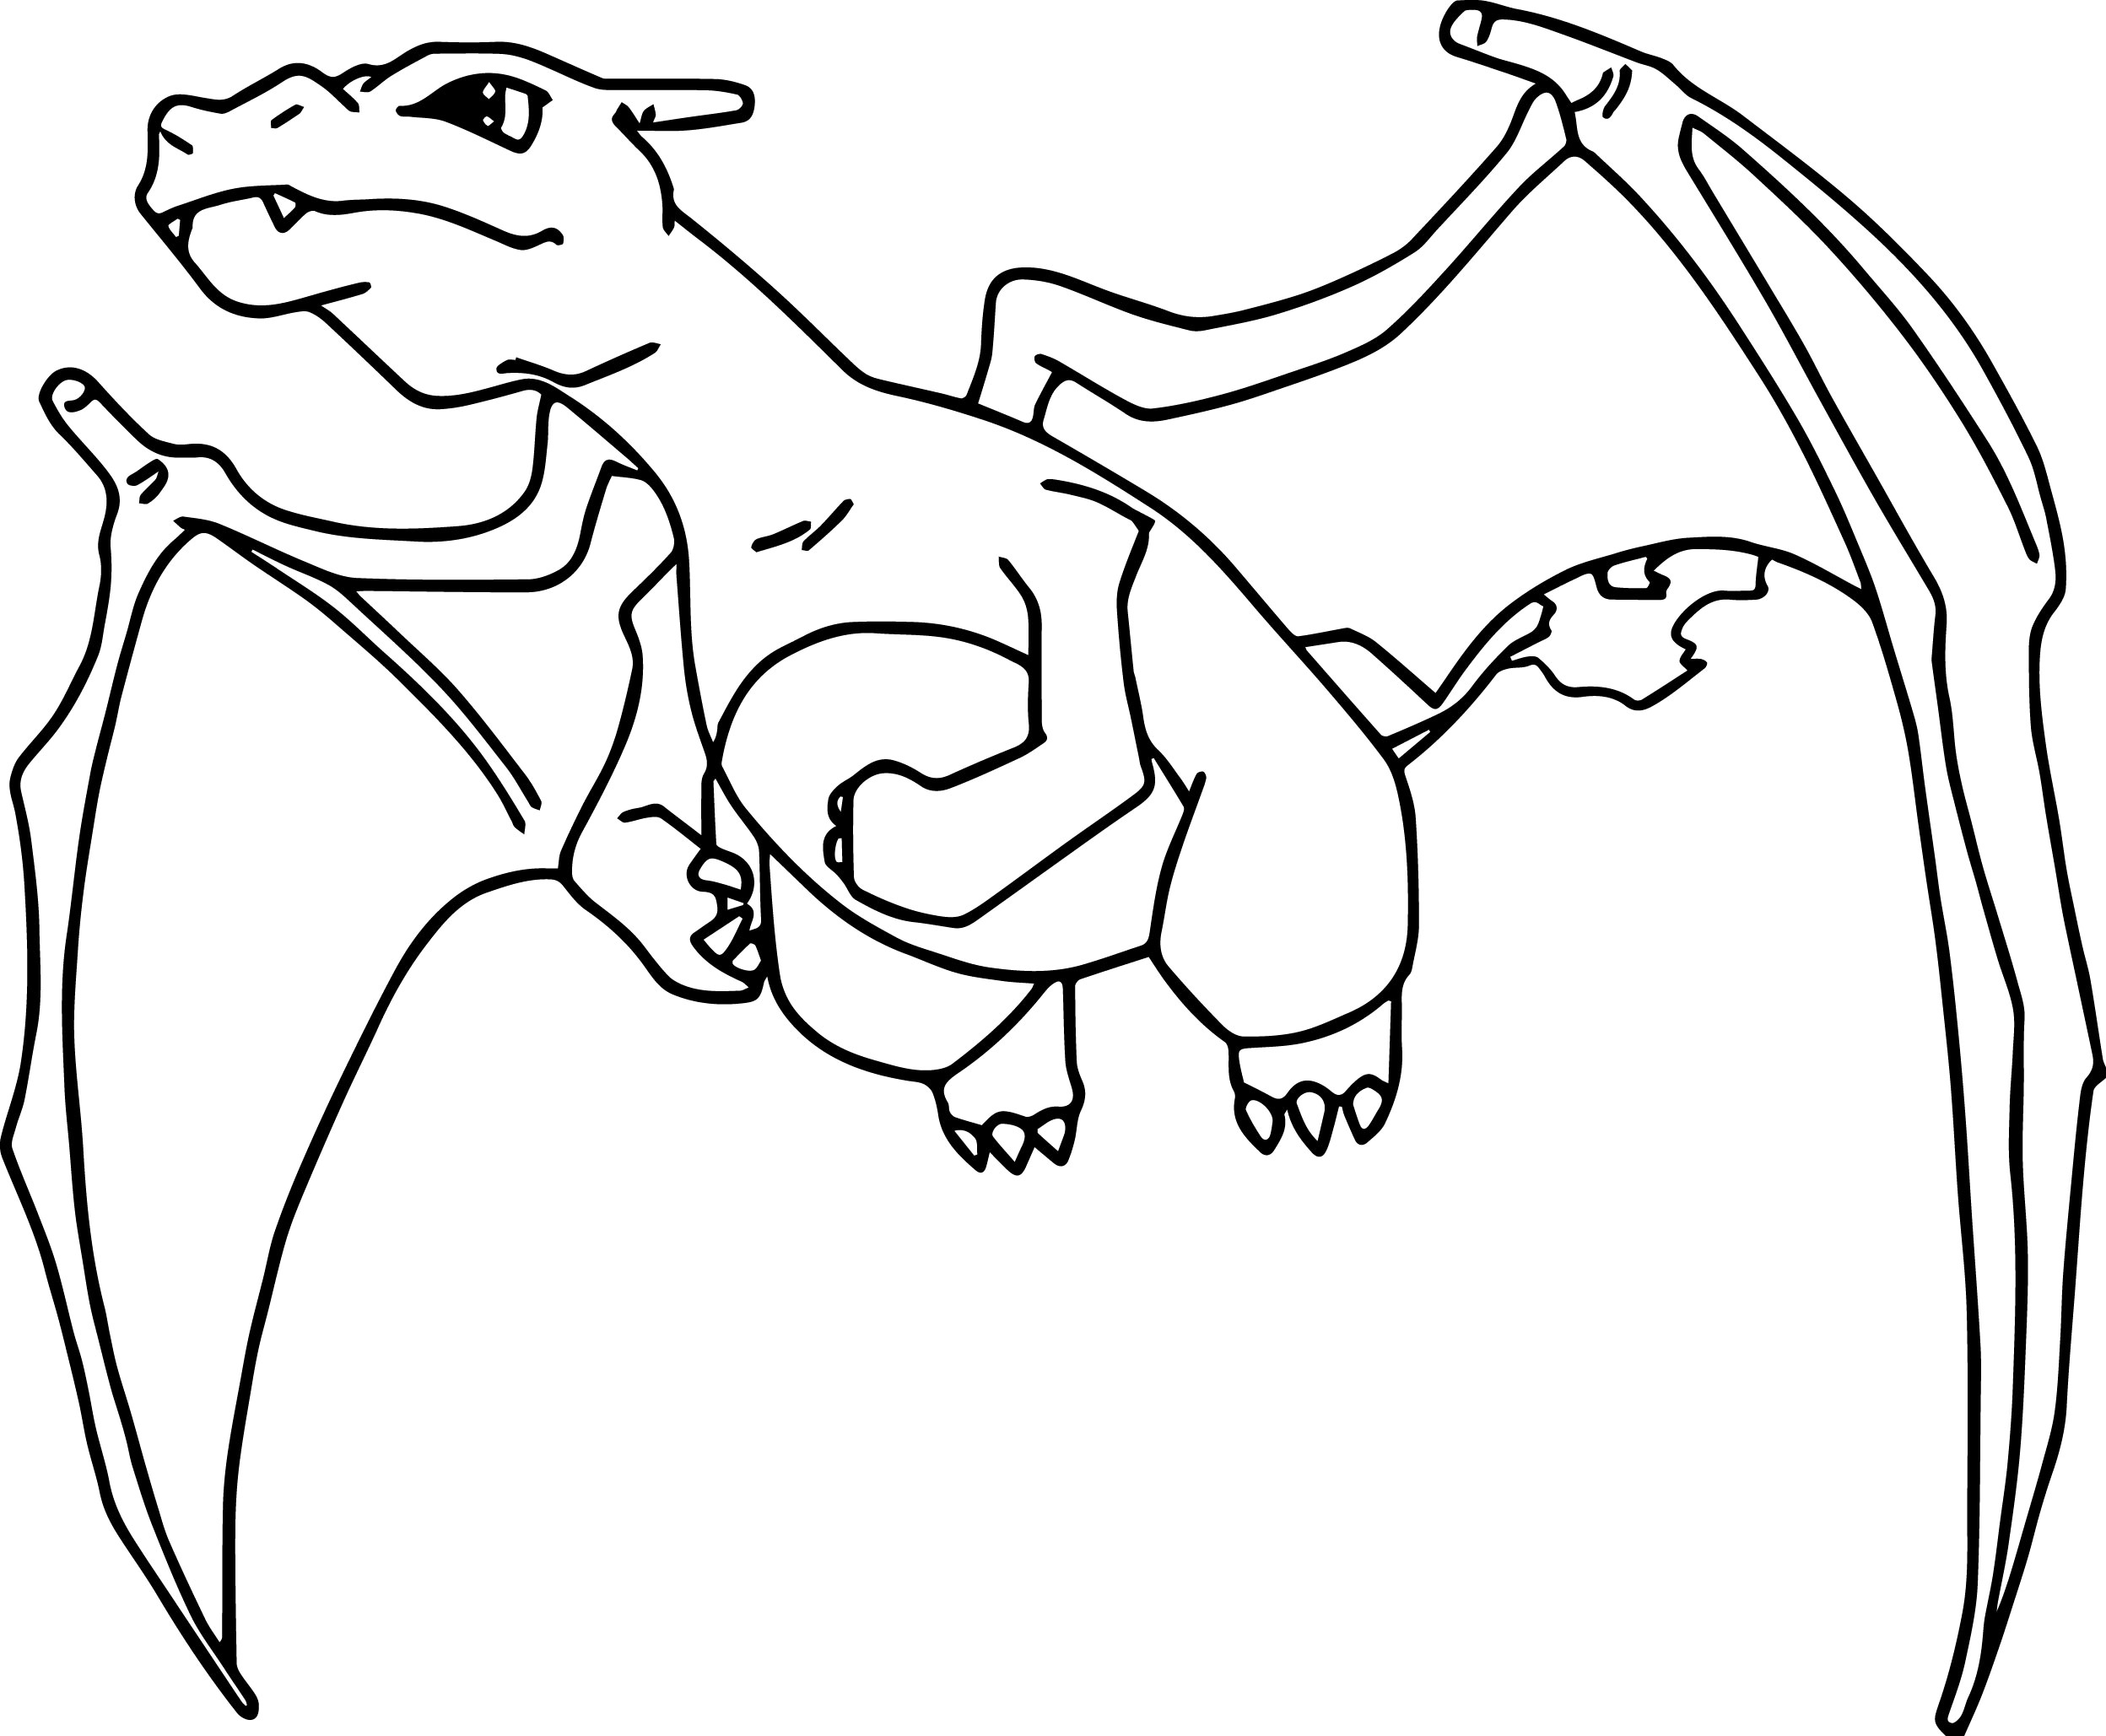 Coloring Pages : Mega Pokemon Coloring Pages Charizard ...